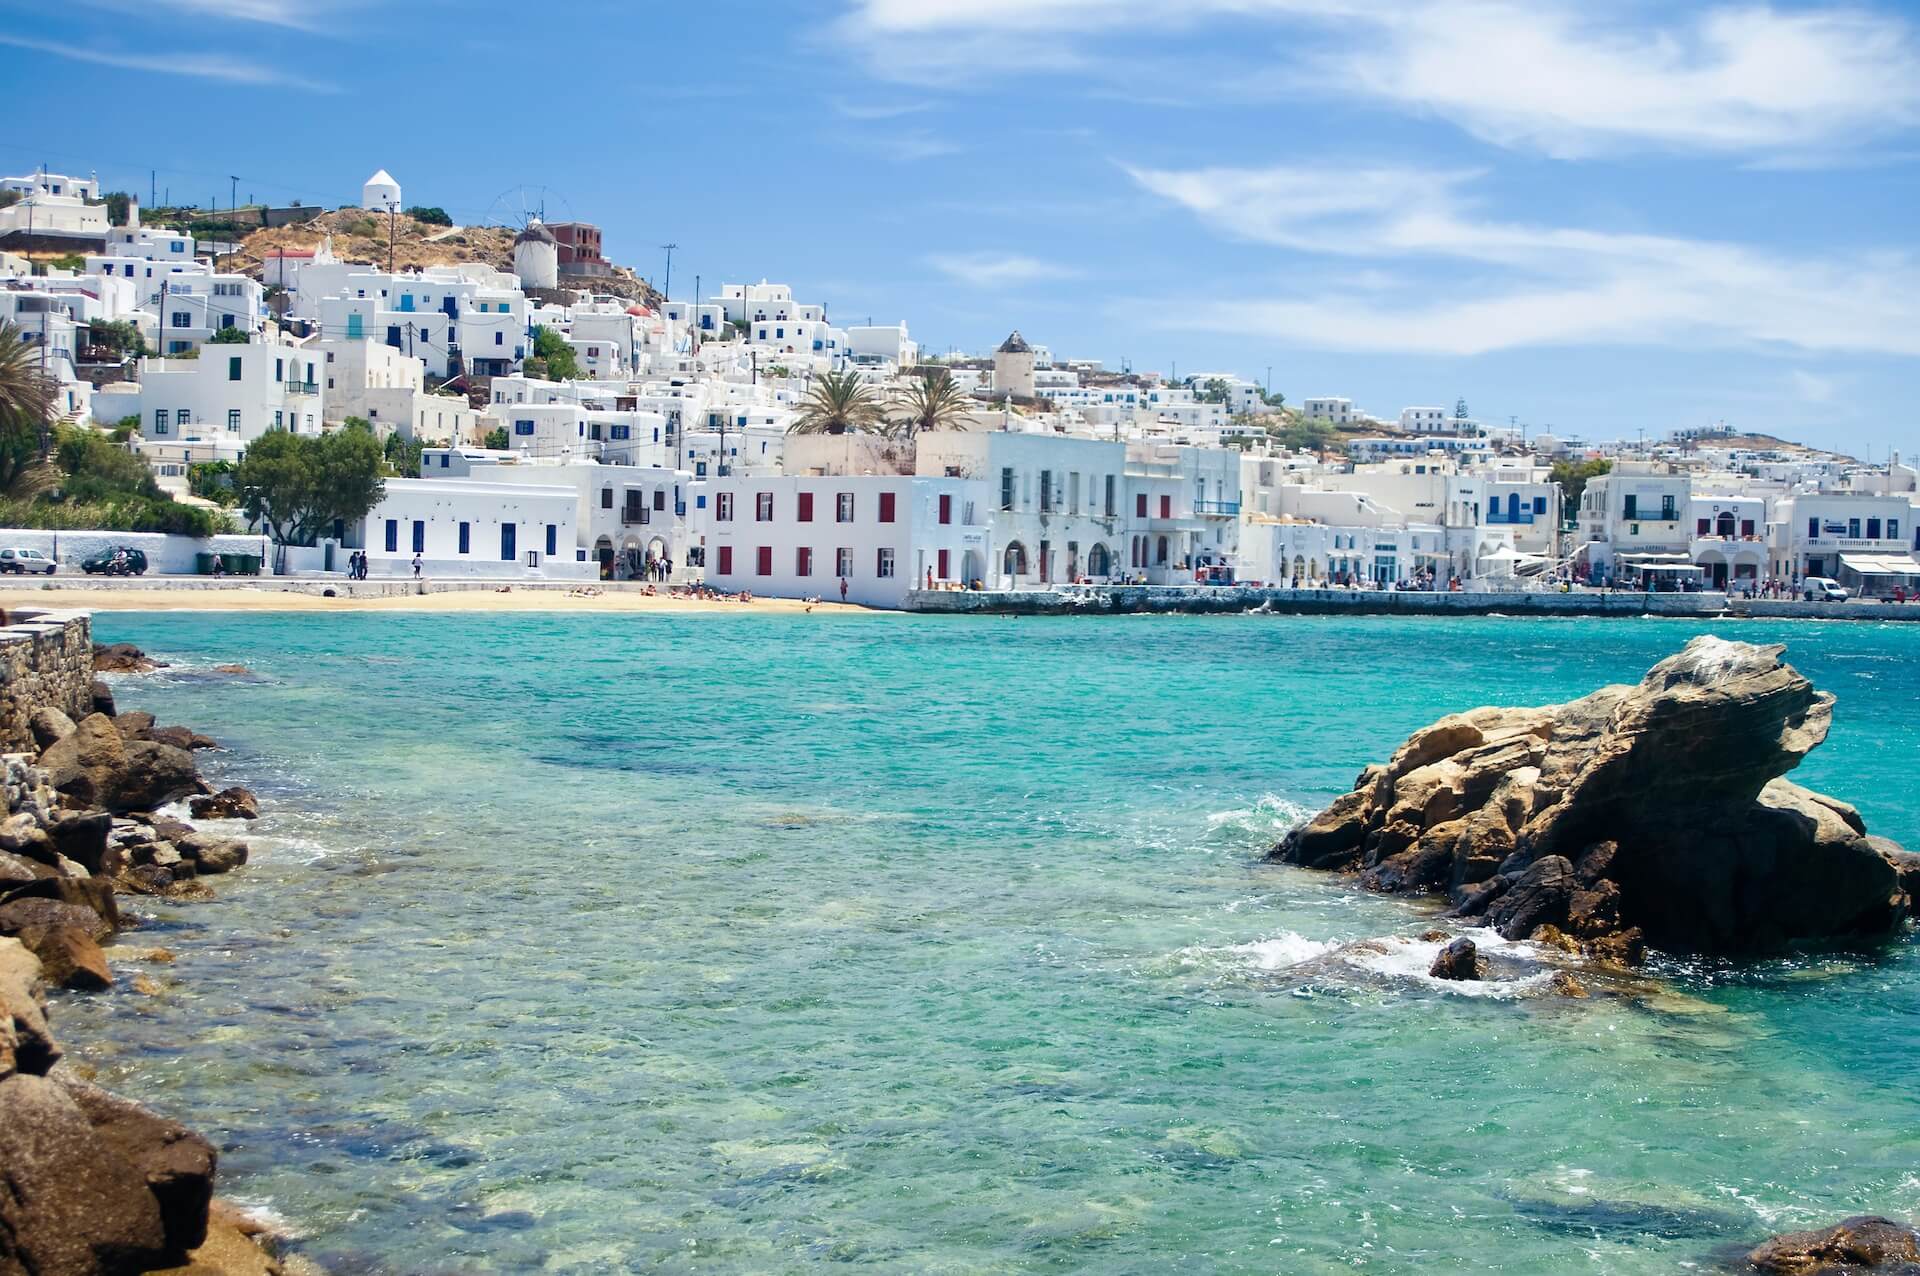 The houses on the coast of Mykonos